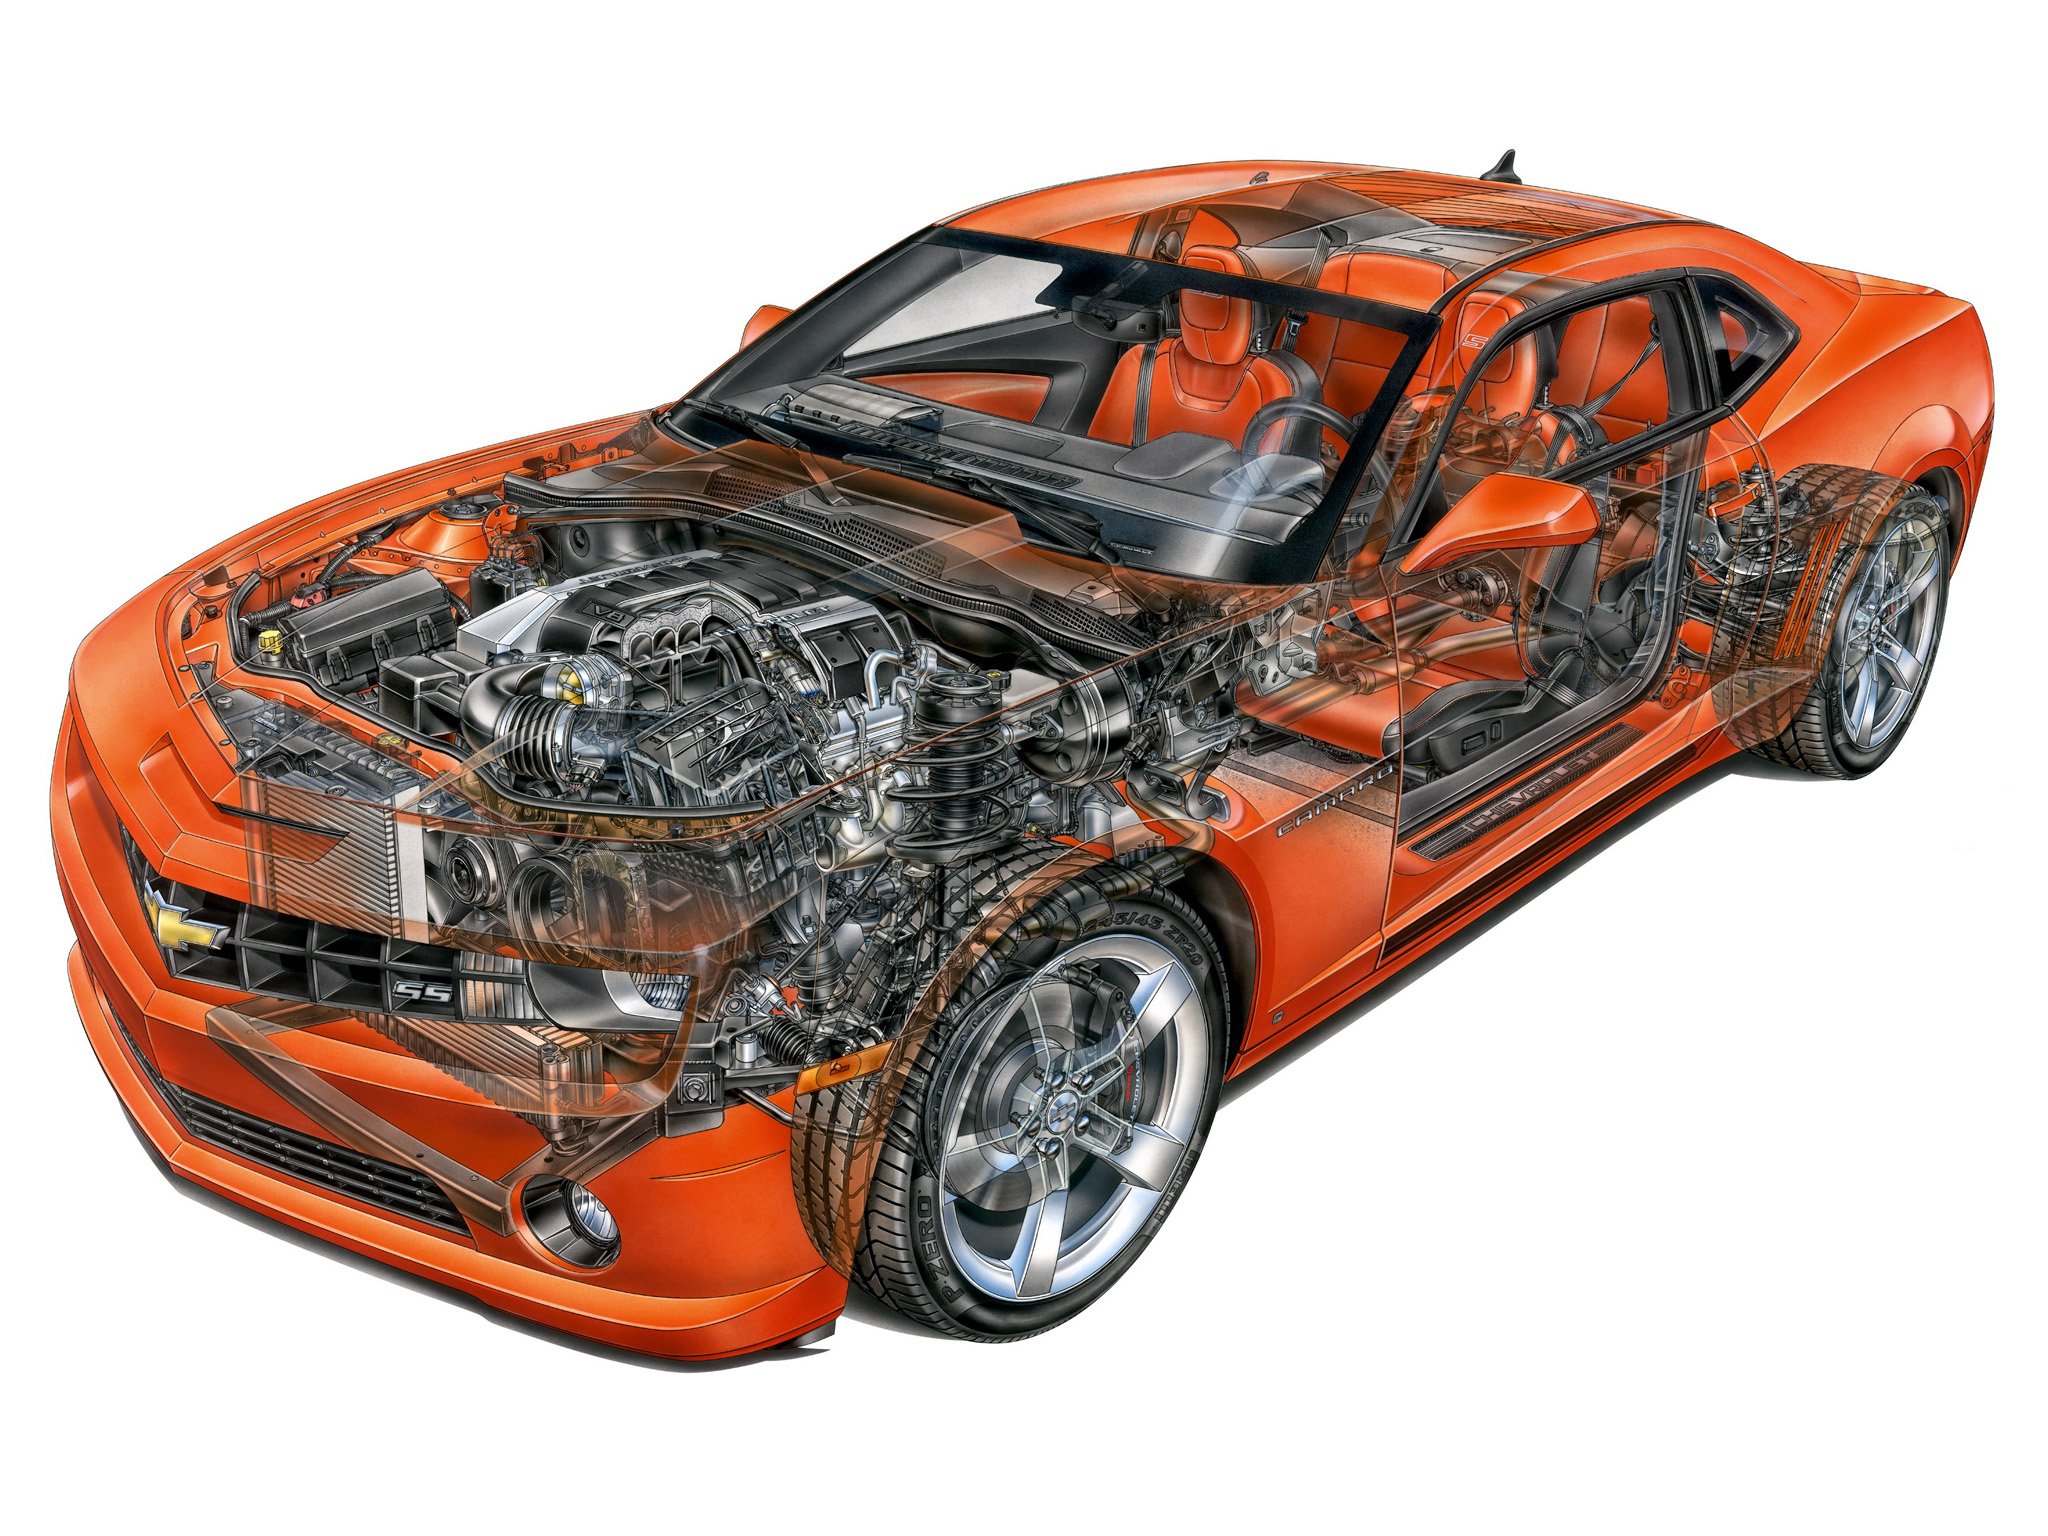 chevrolet, Chevy, Camaro, Ss, 2009, Coupe, Cars, Technical, Cutaway Wallpaper